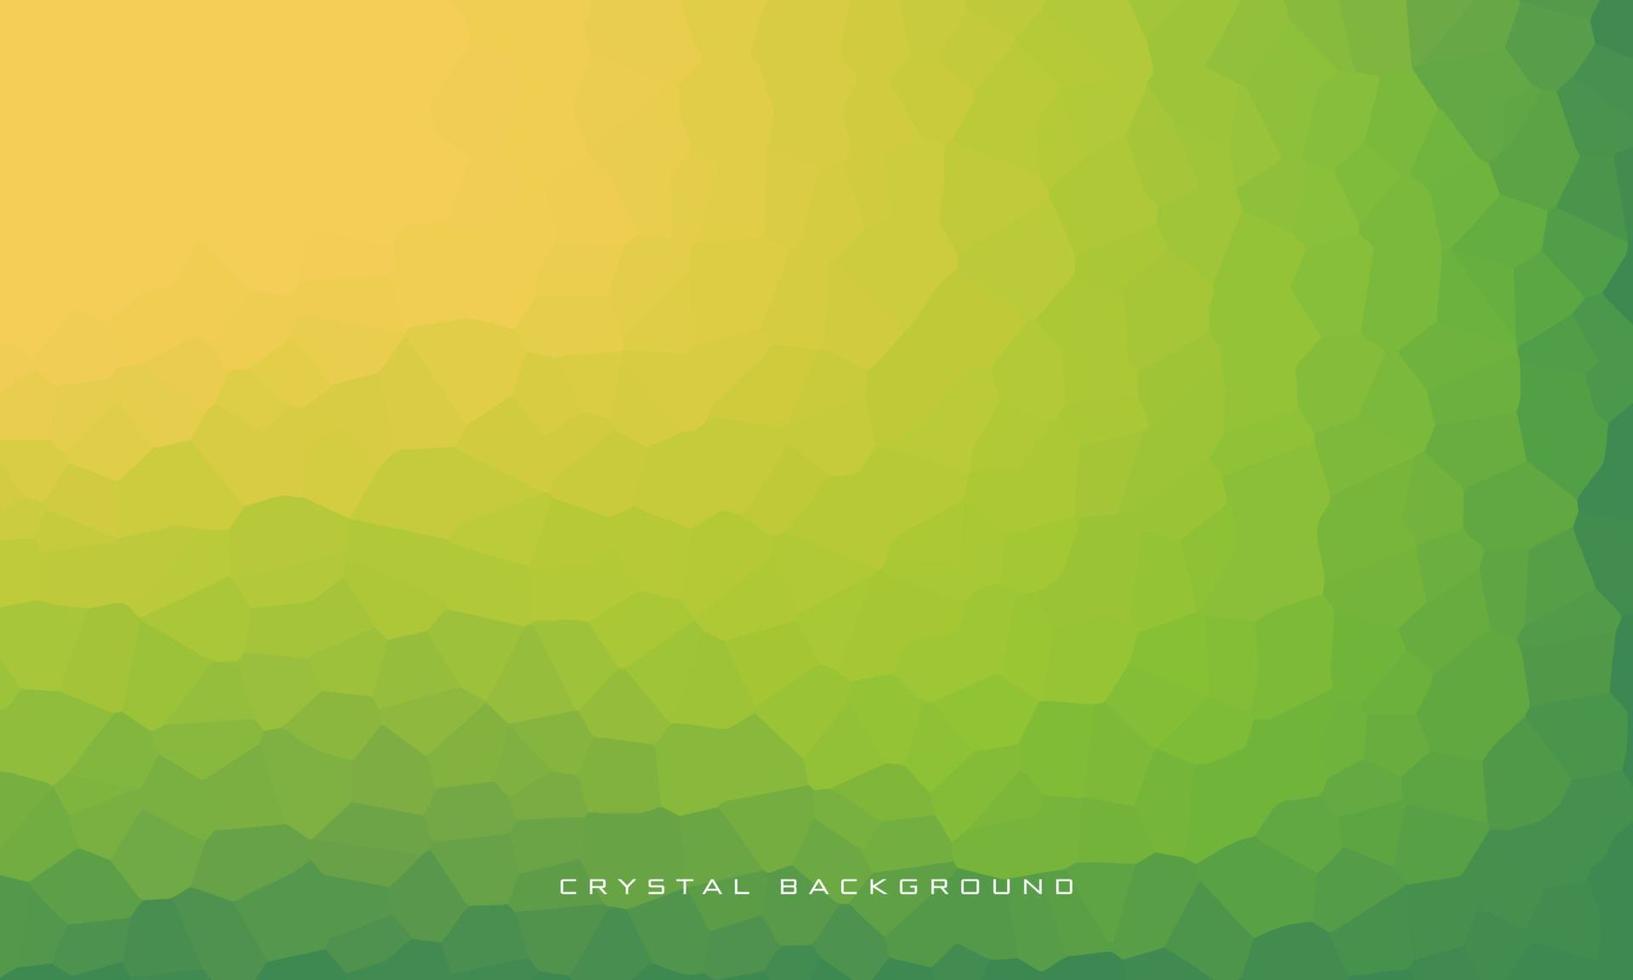 Gradient crystal background with green domination. Eps10 Vector Design